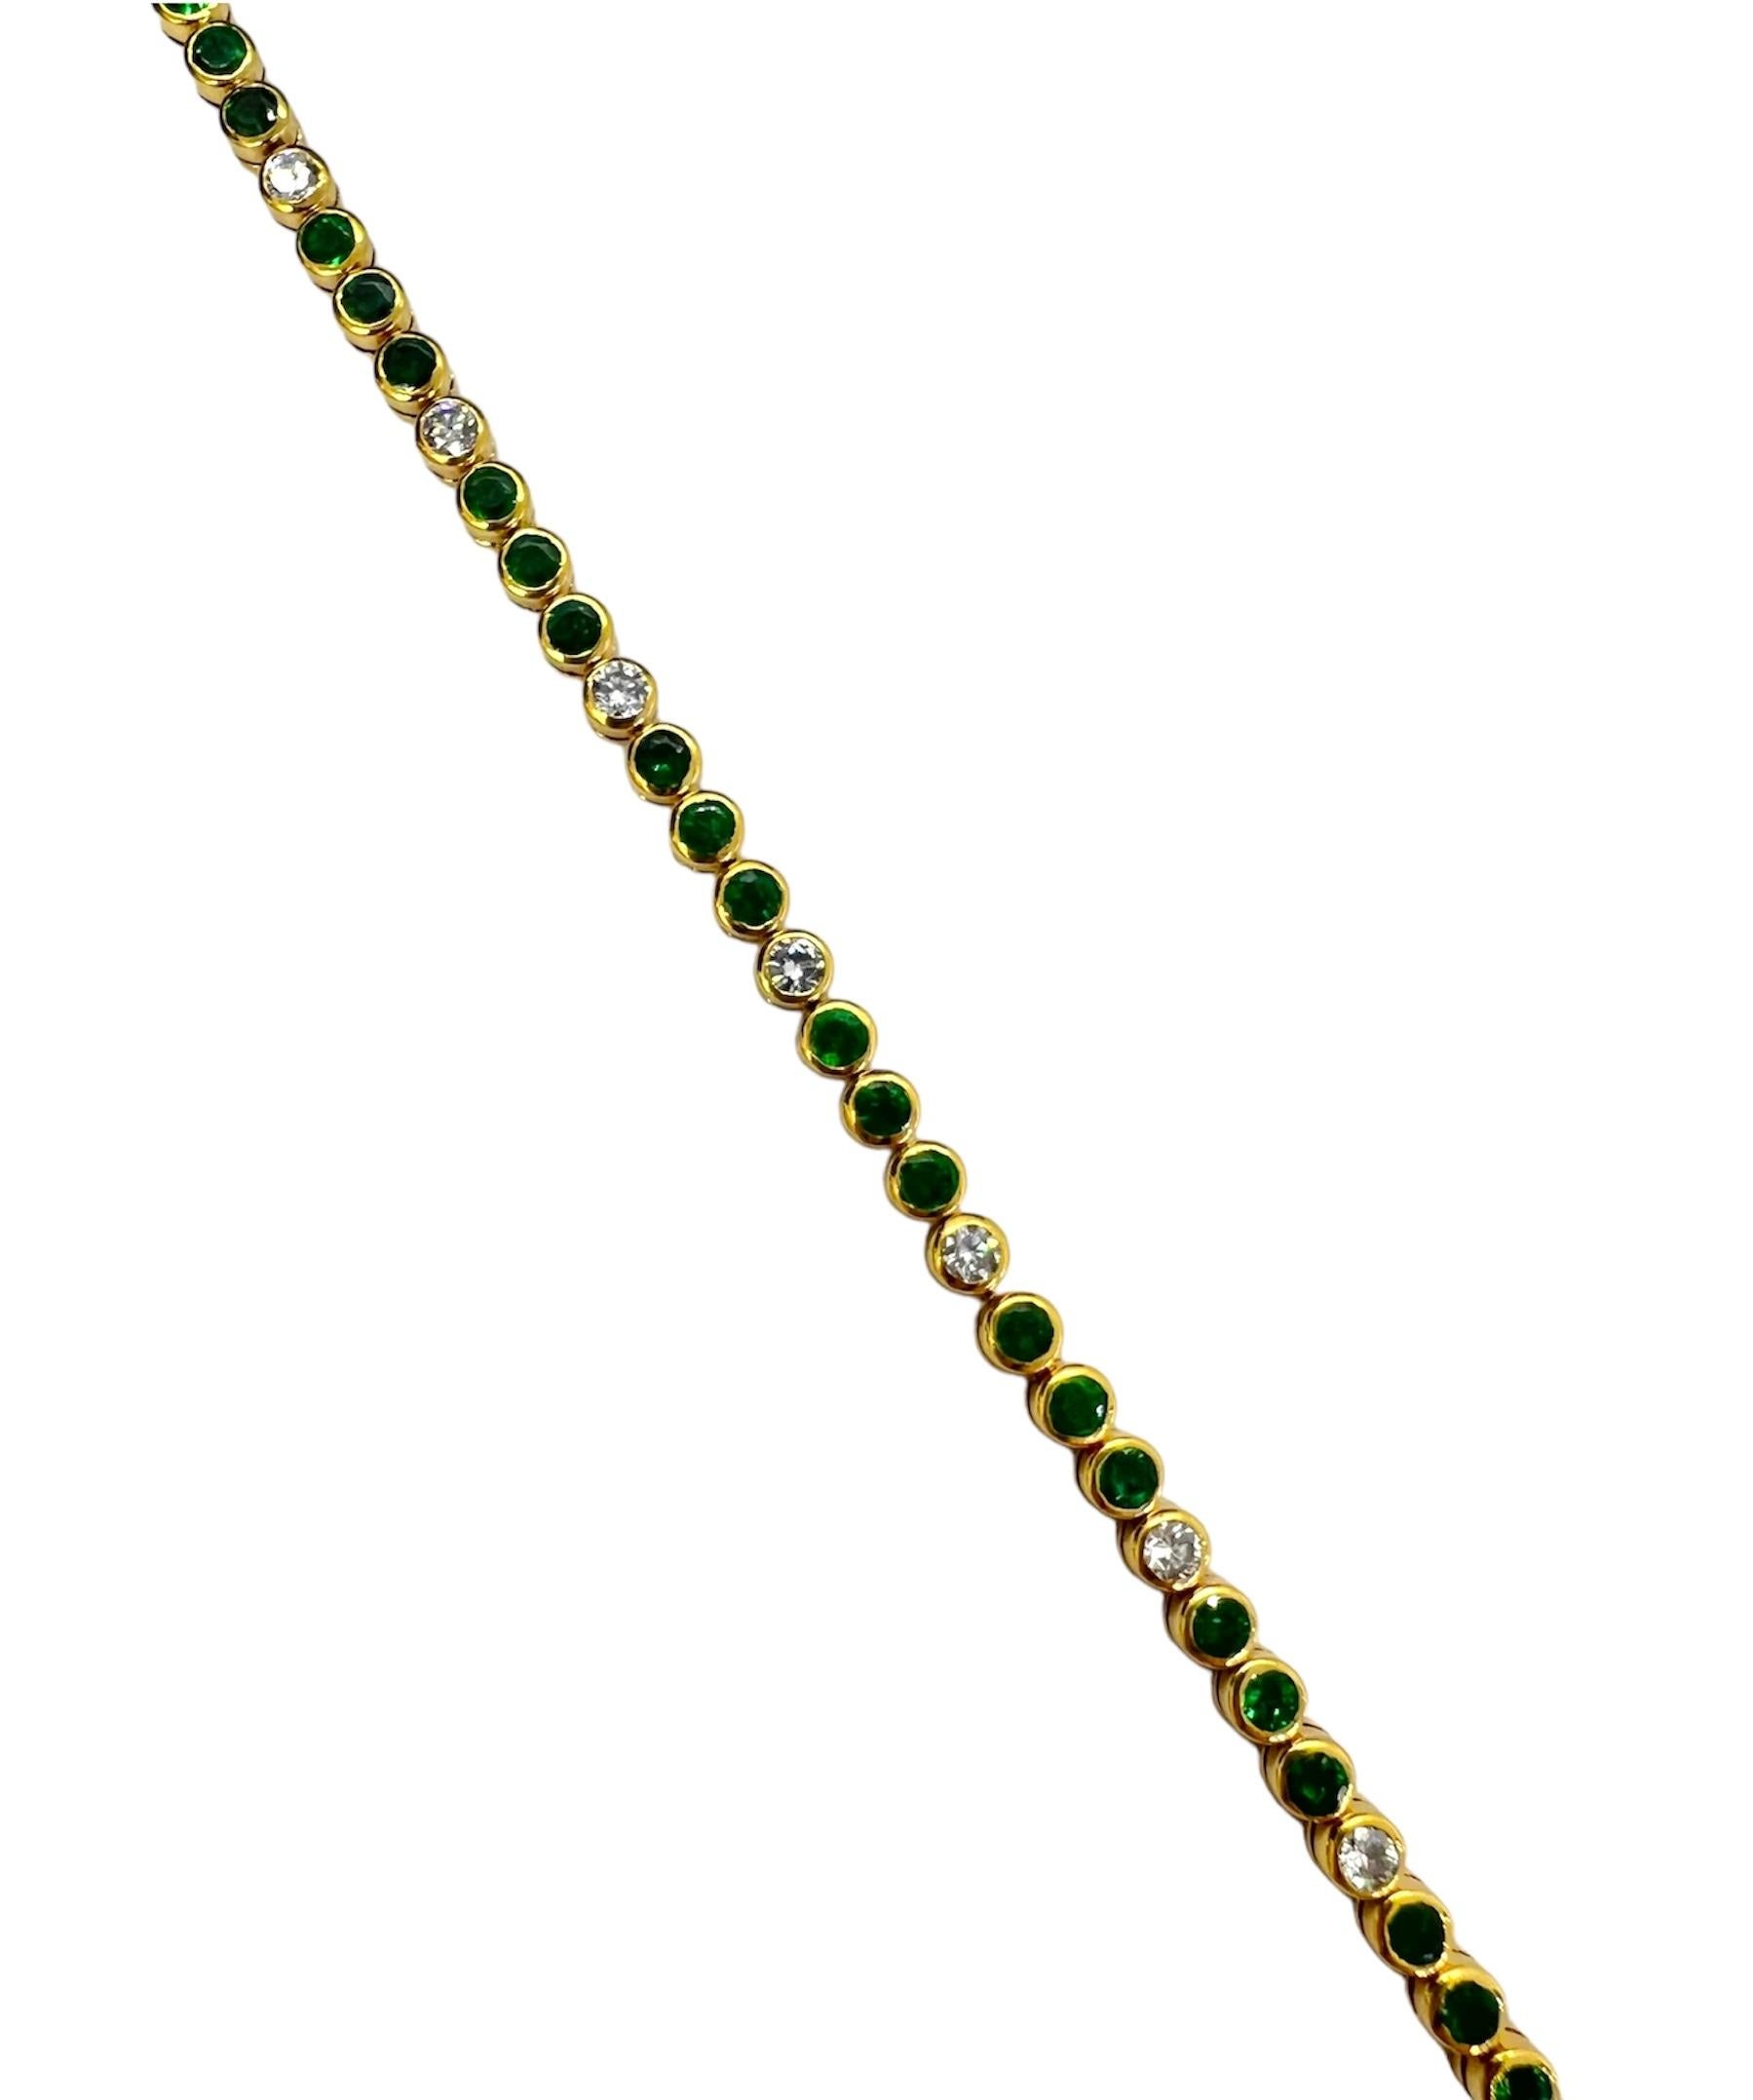 18K yellow gold bracelet with round diamonds and emeralds.

Sophia D by Joseph Dardashti LTD has been known worldwide for 35 years and are inspired by classic Art Deco design that merges with modern manufacturing techniques.
